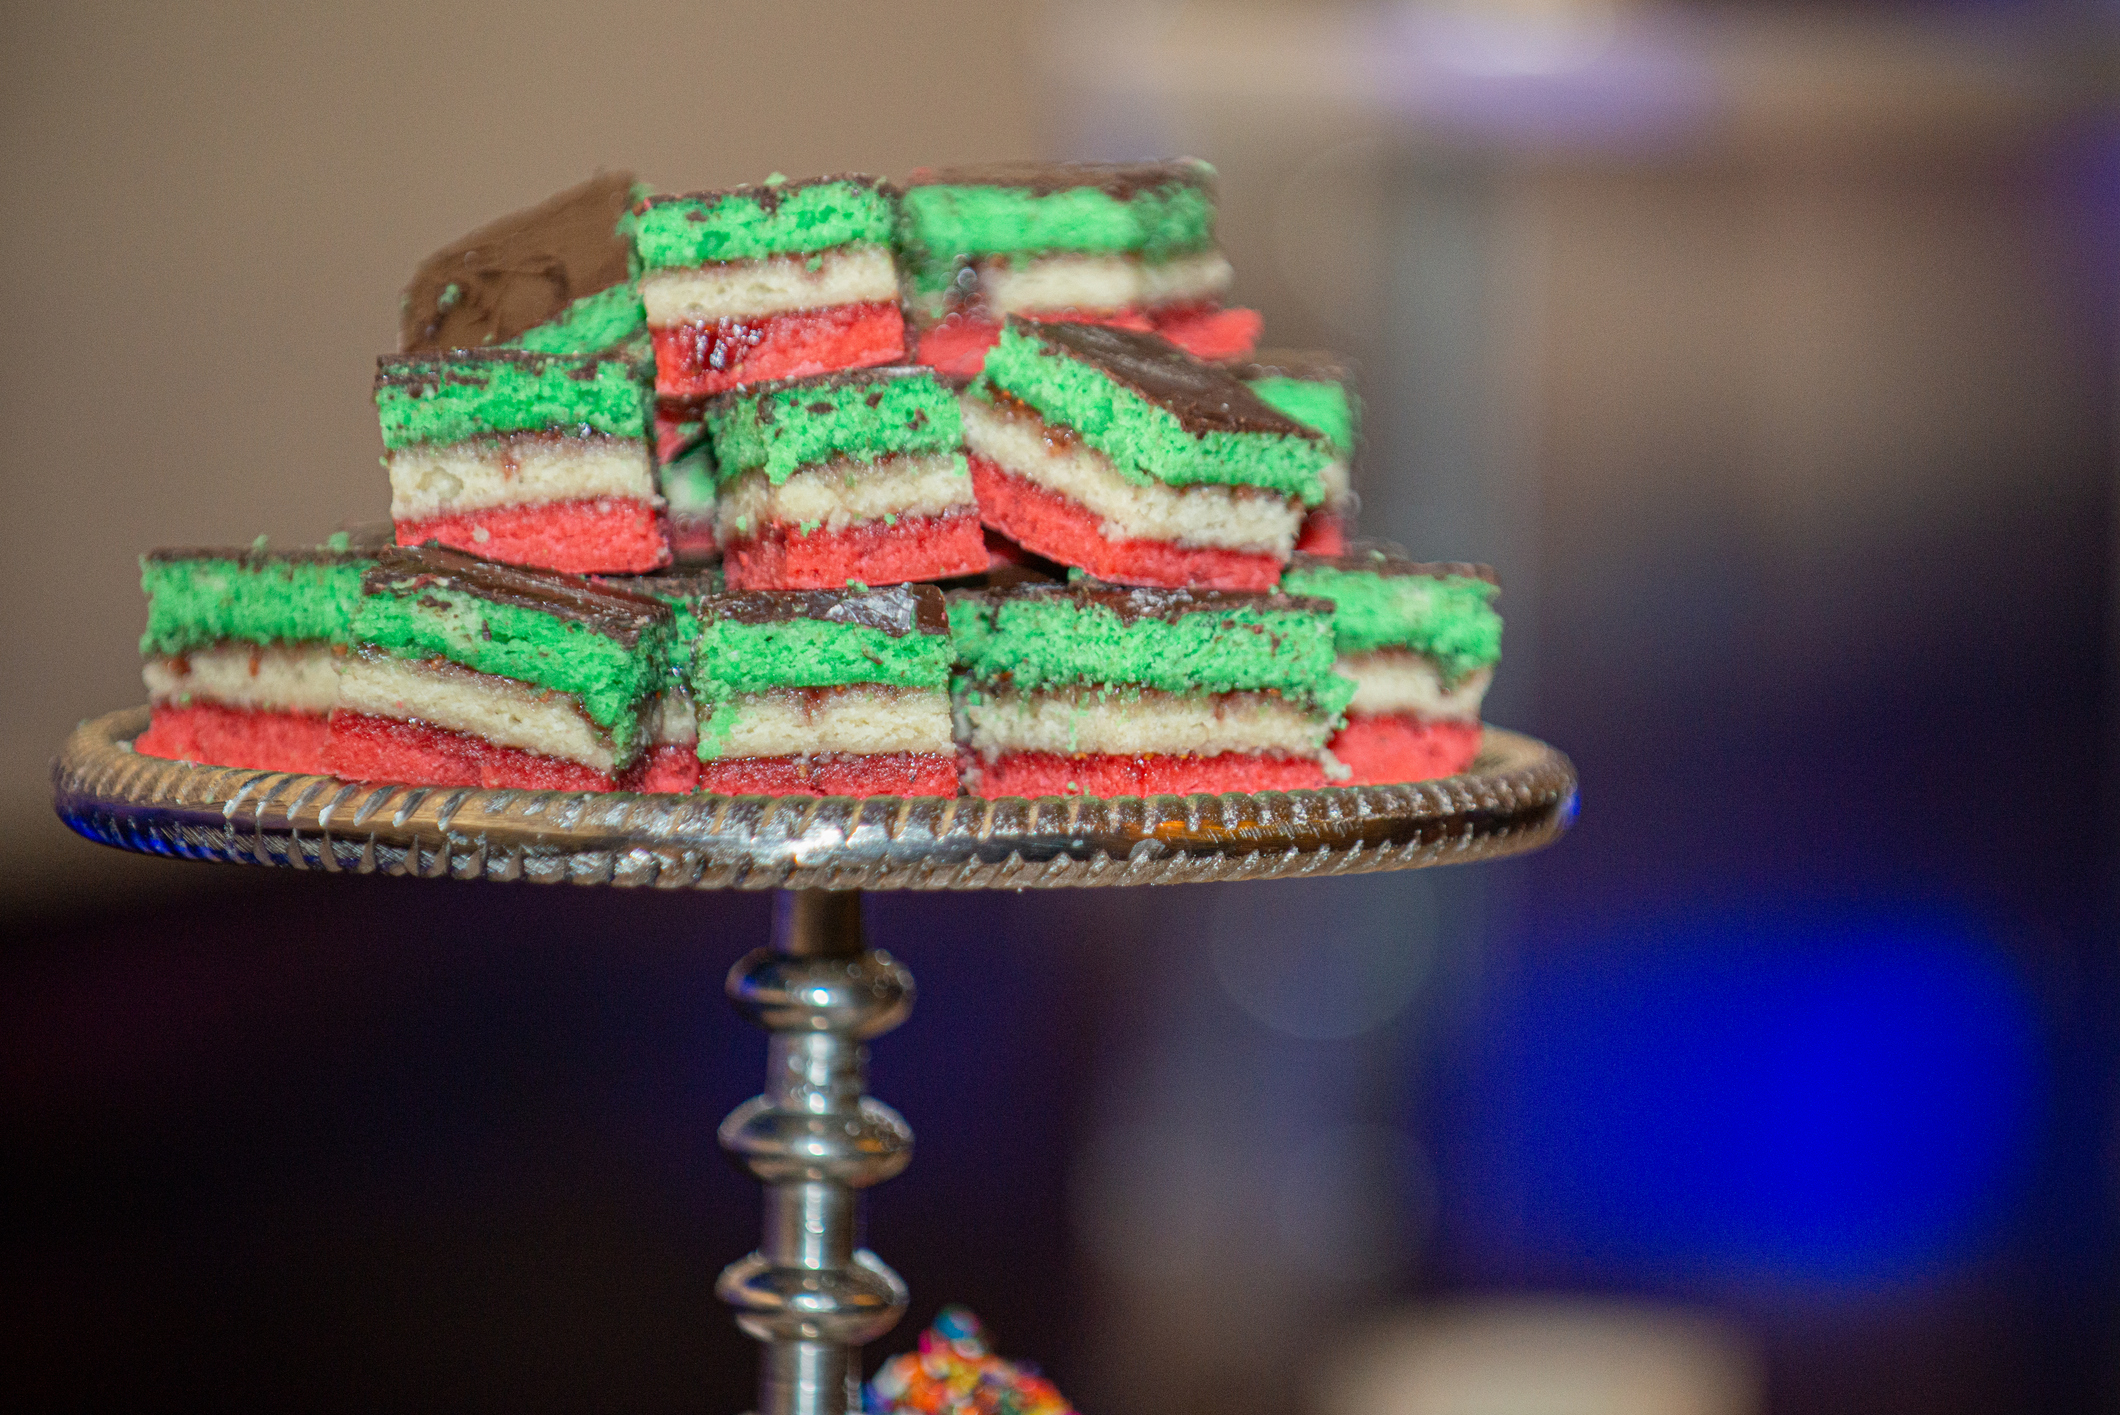 A layered rainbow cake displayed on a cake stand